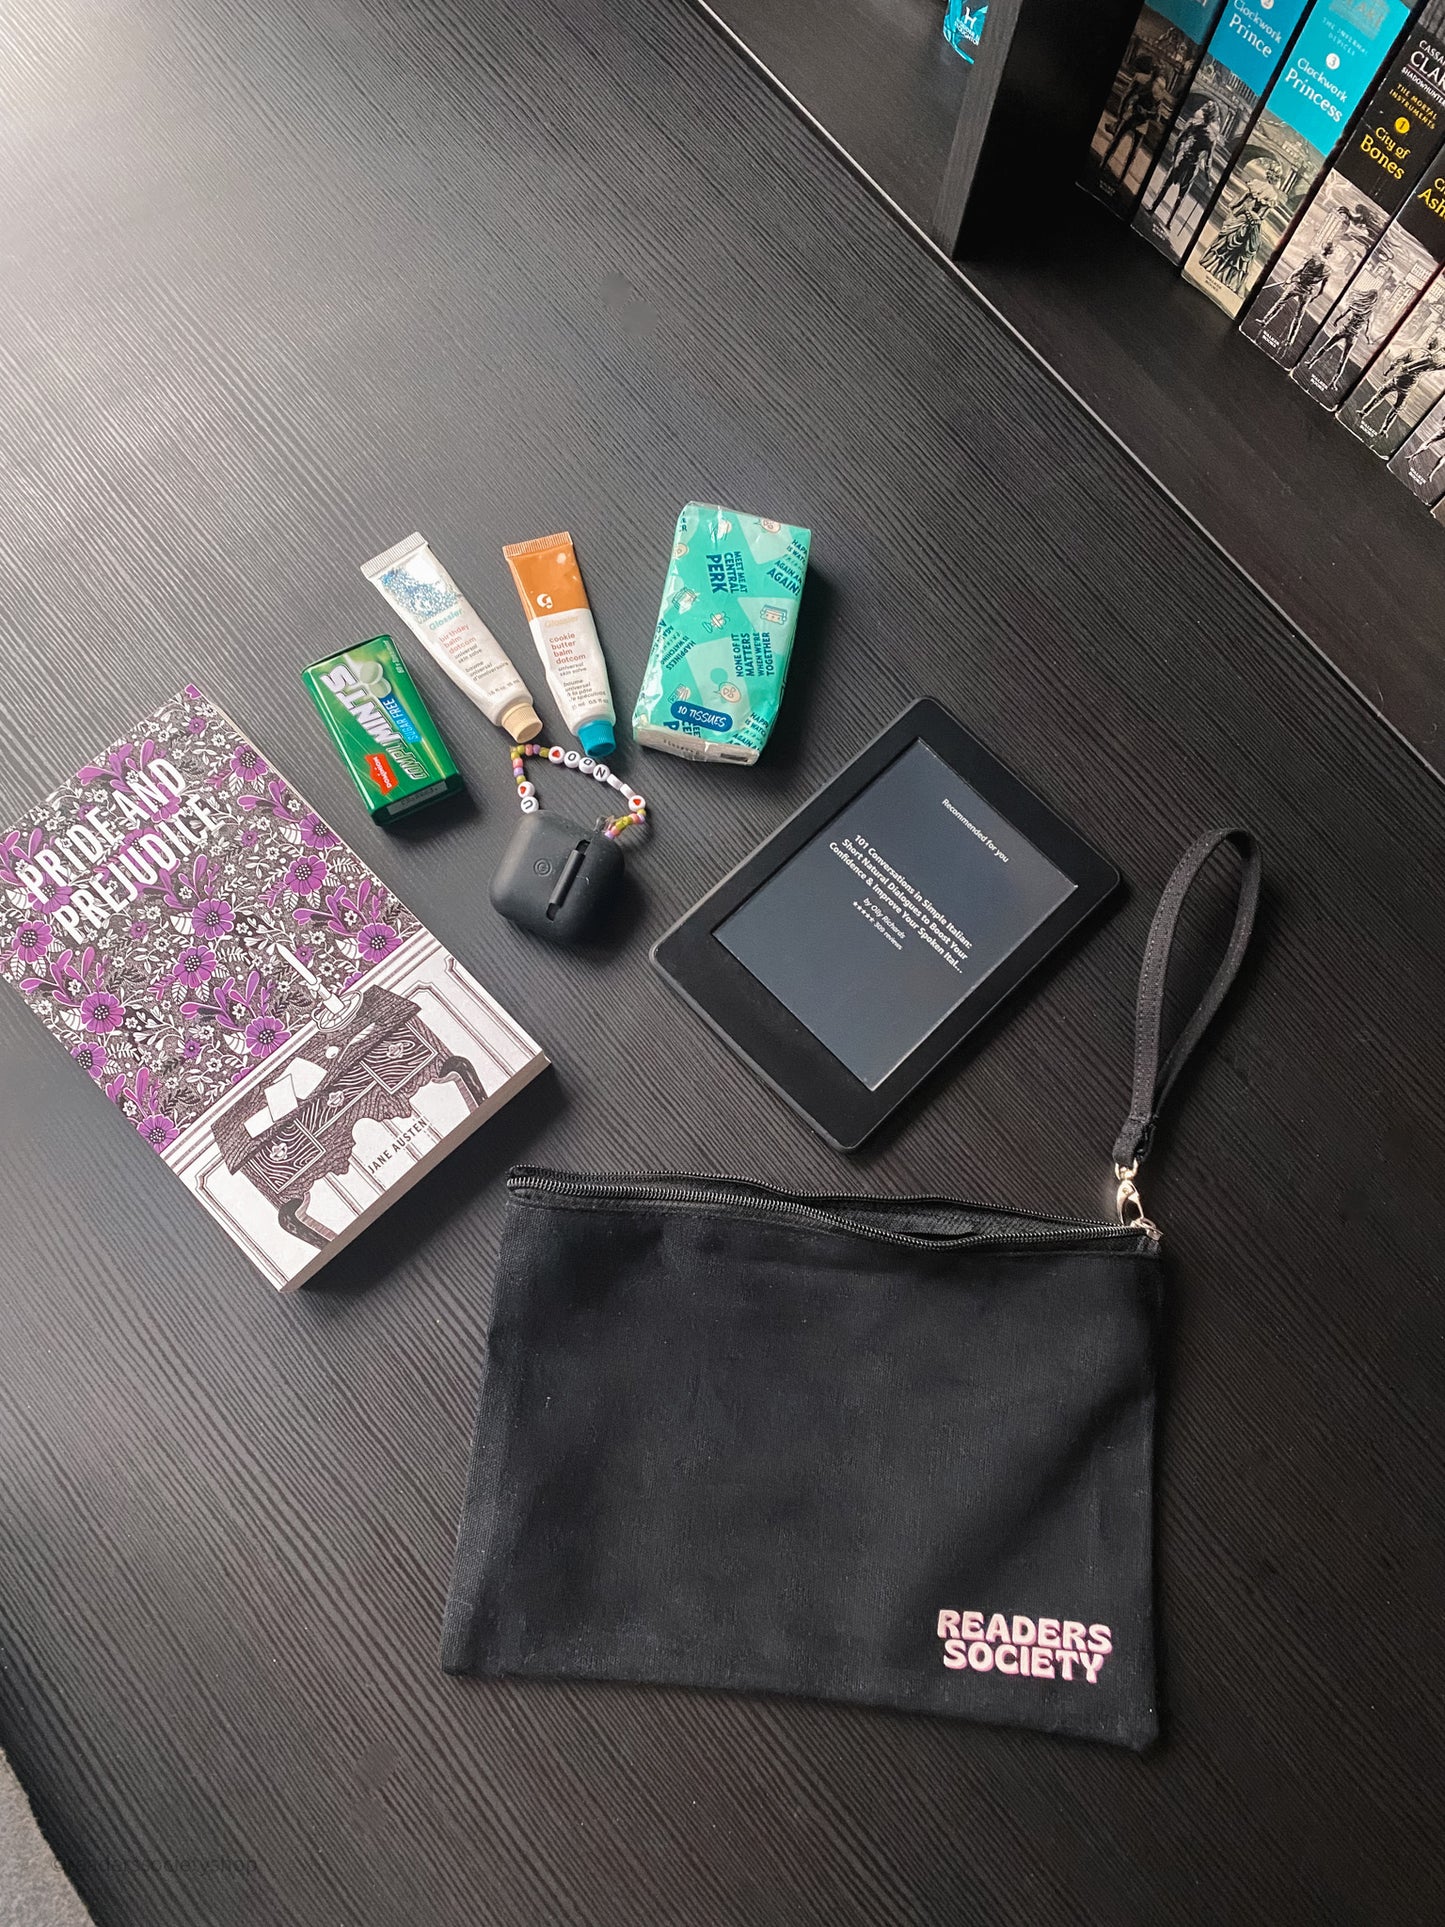 Book Pouch